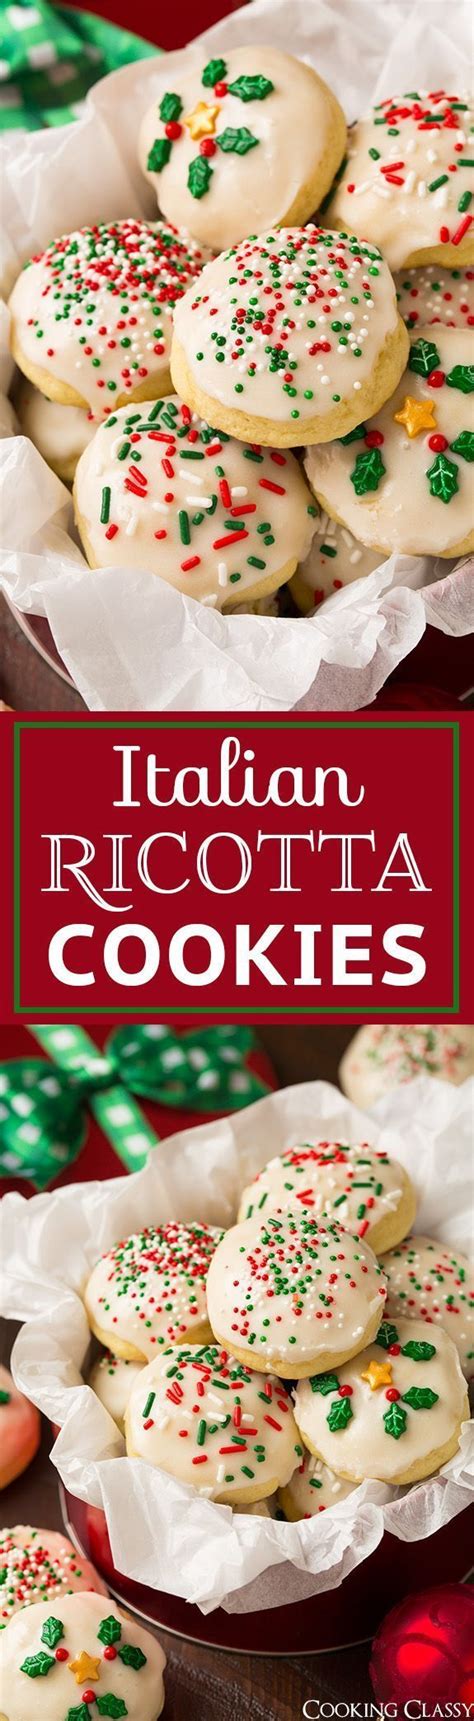 The third place winner of cityline's 2016 cookie swap is a fun twist on a classic lemon cookie with graham wafer crumbs, chocolate chips and dried cranberries! Lemon Ricotta Christmas Cookies : Italian Lemon Ricotta Cookies | James & Everett | Recipe ...